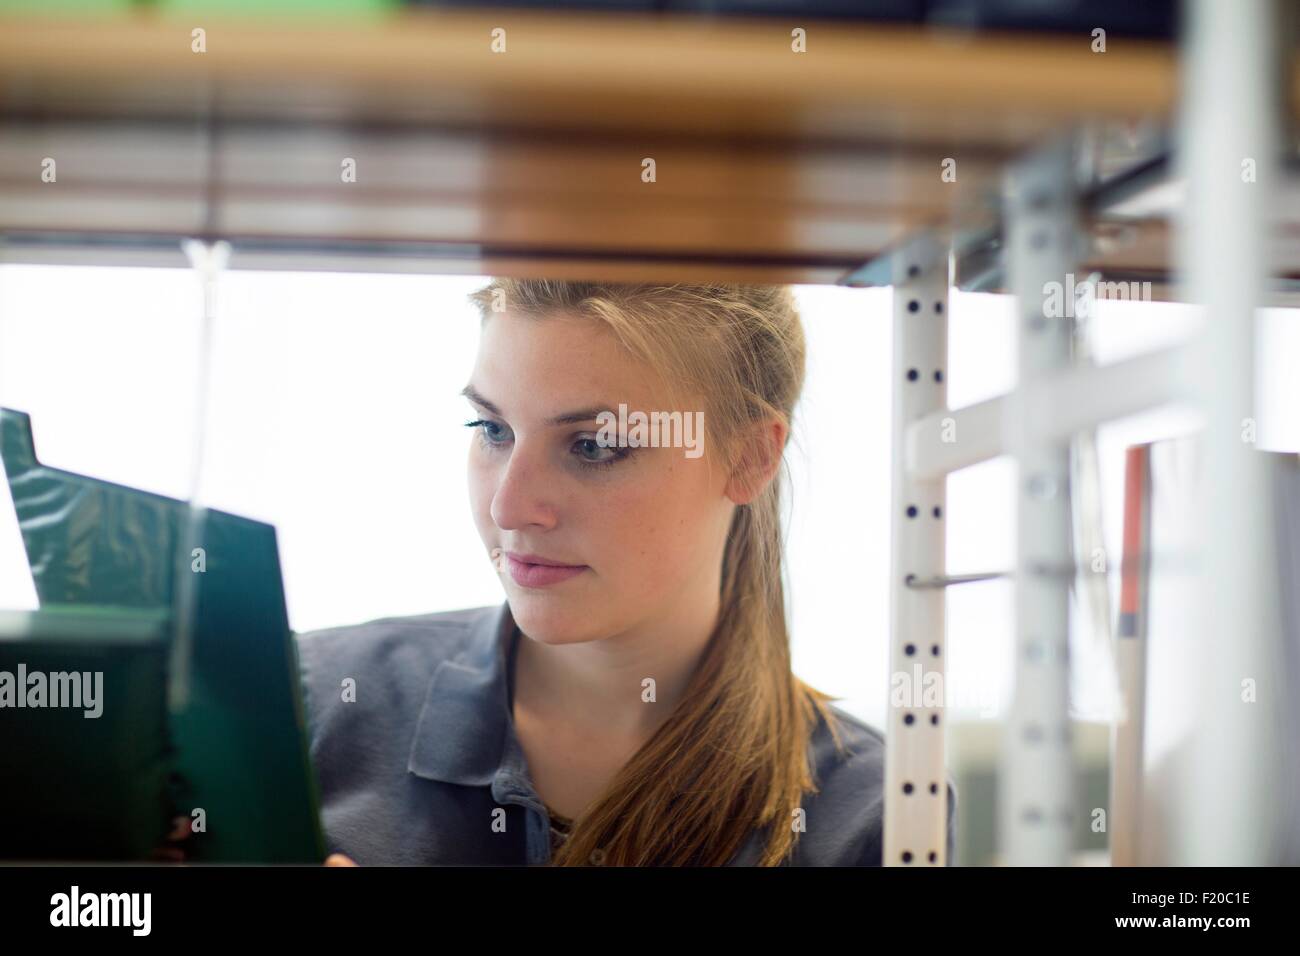 Young female student searching for textbook in library Stock Photo